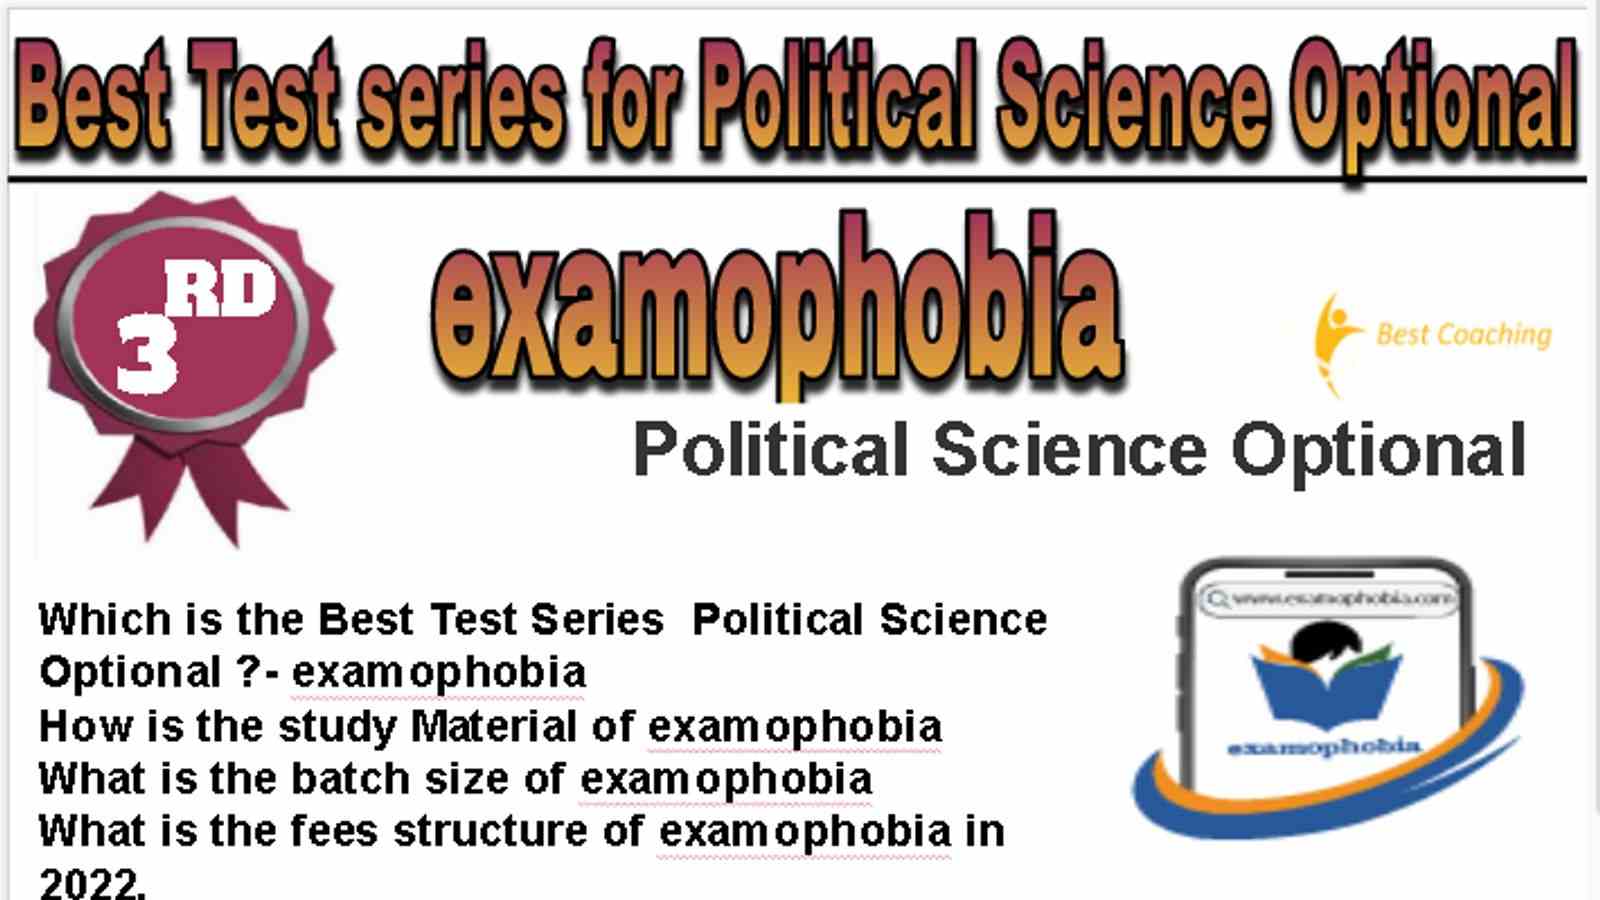 Rank 3 Best Test series for Political Science Optional